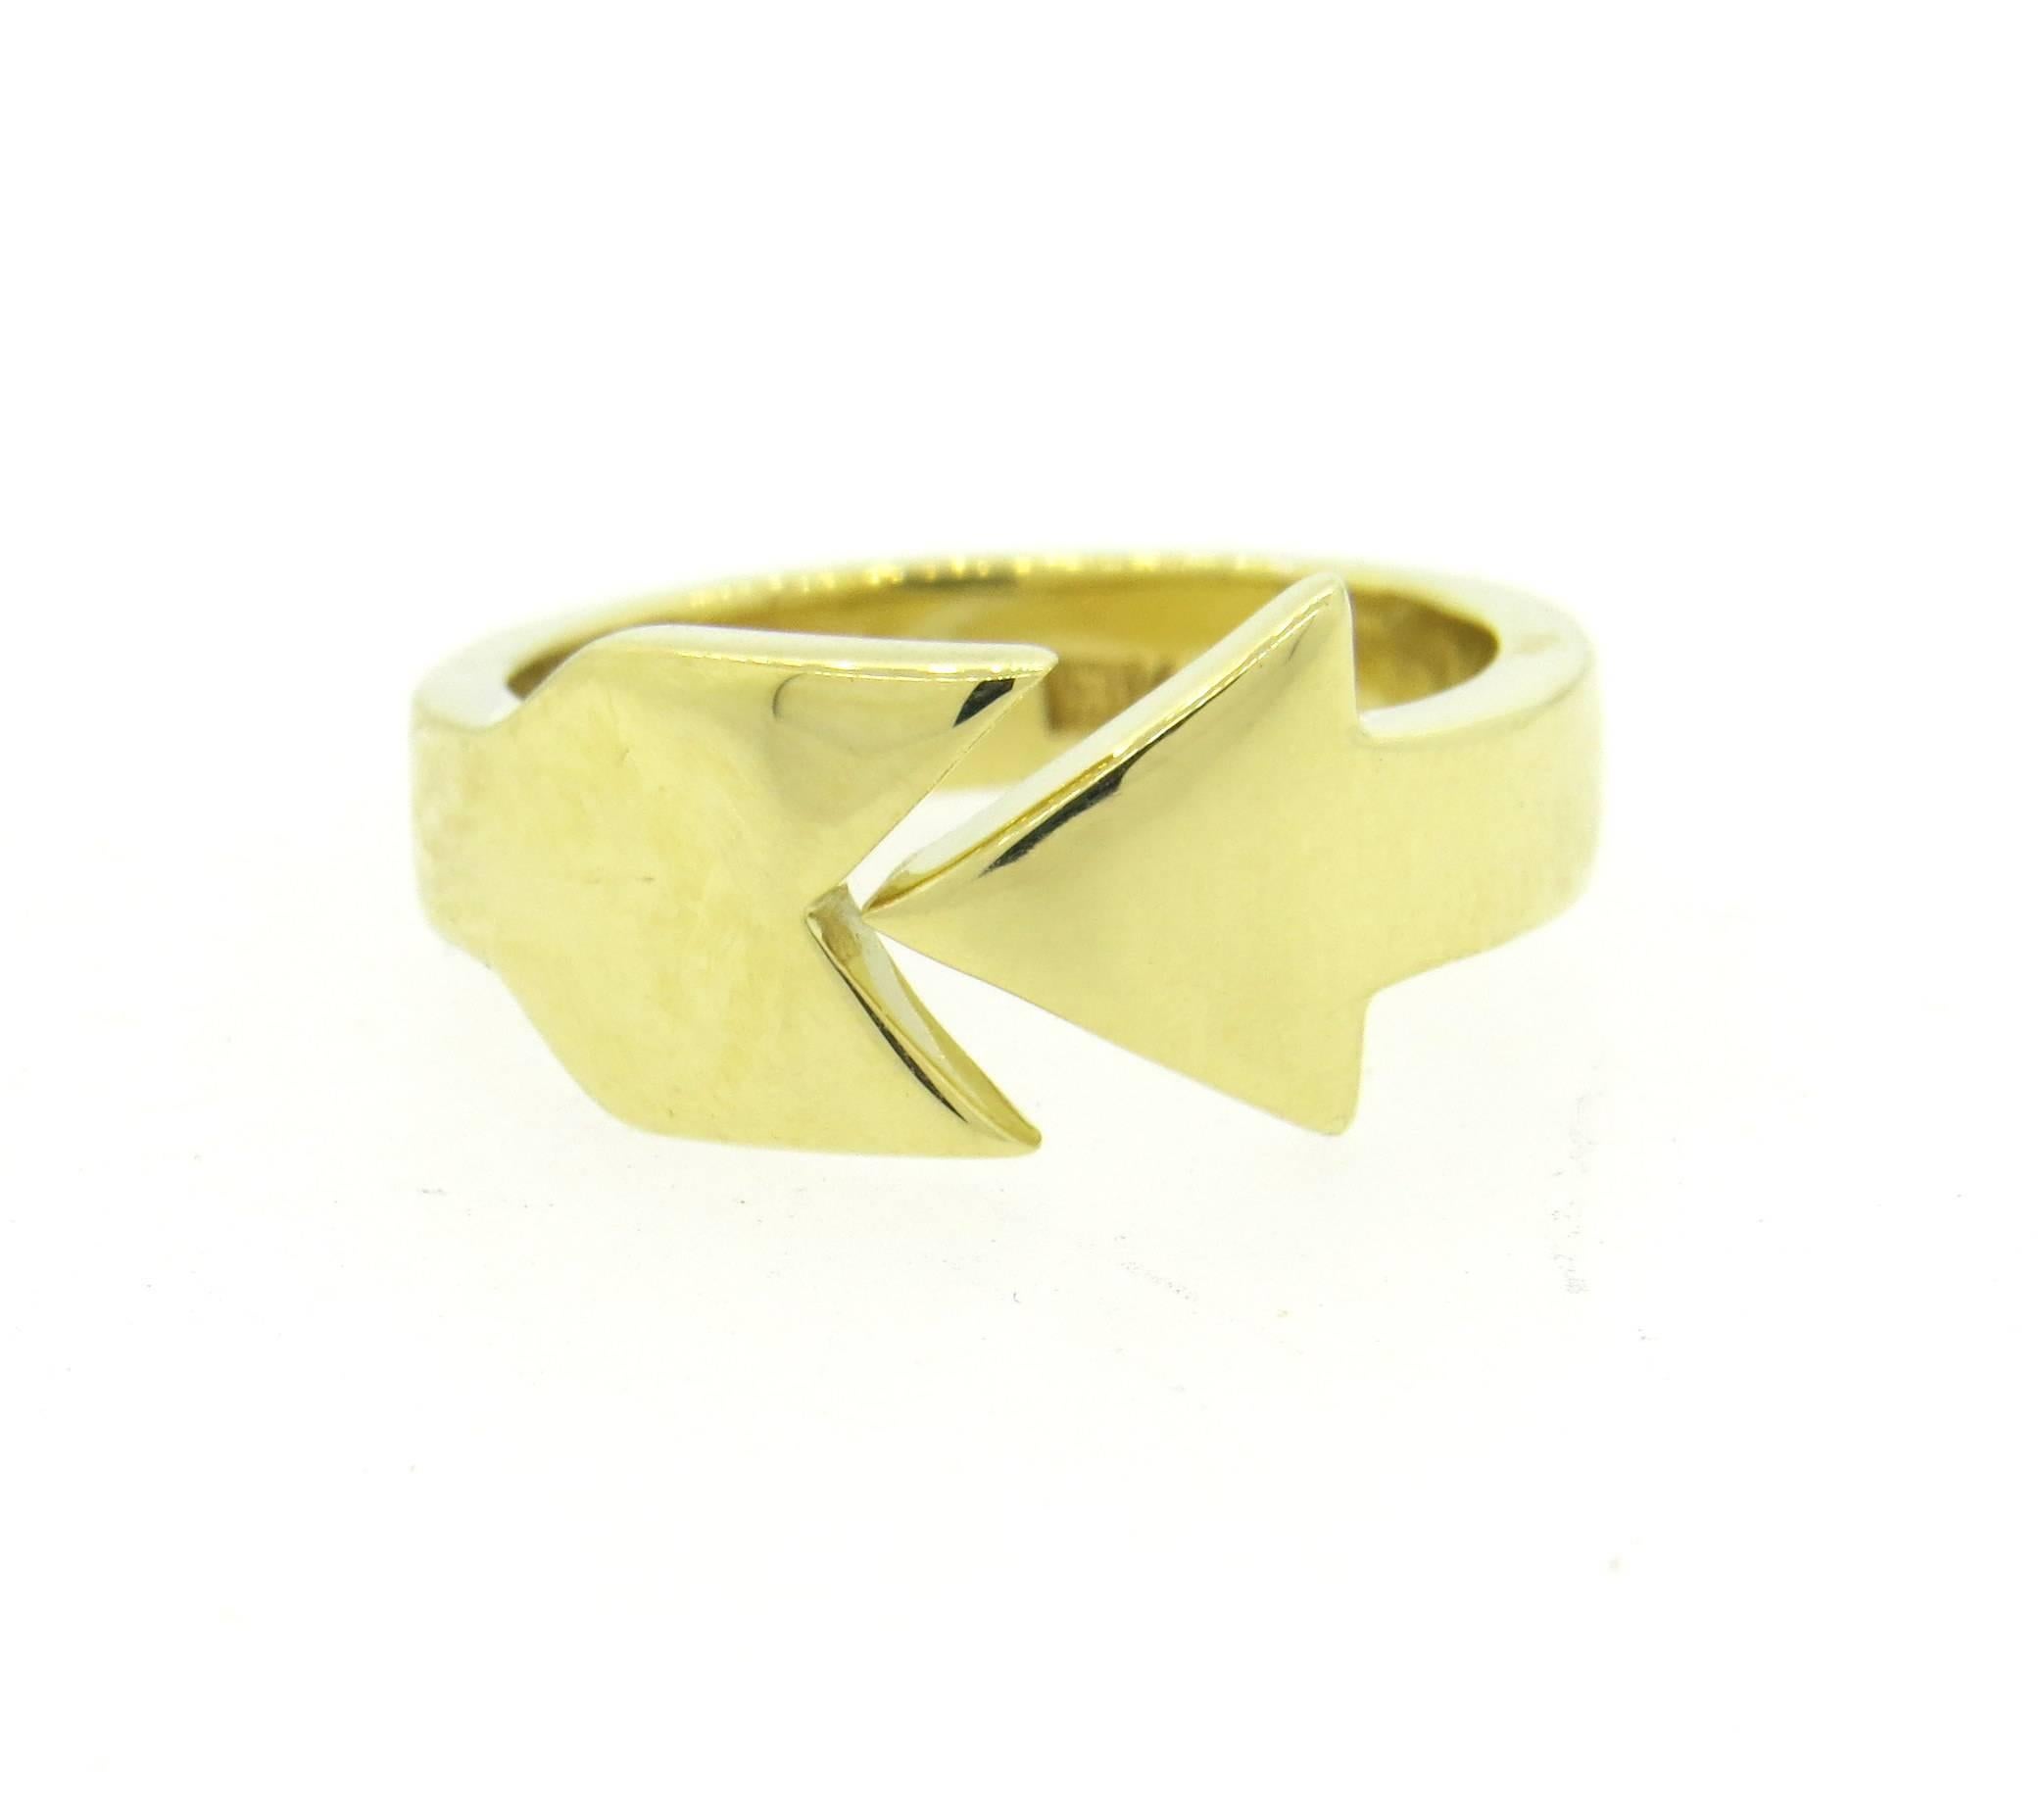 18k yellow gold Cartier ring, featuring arrow design. Ring is a size 5, ring top is 8.3mm at widest point. Marked: Cartier, 18k. Weight - 6.9 grams 